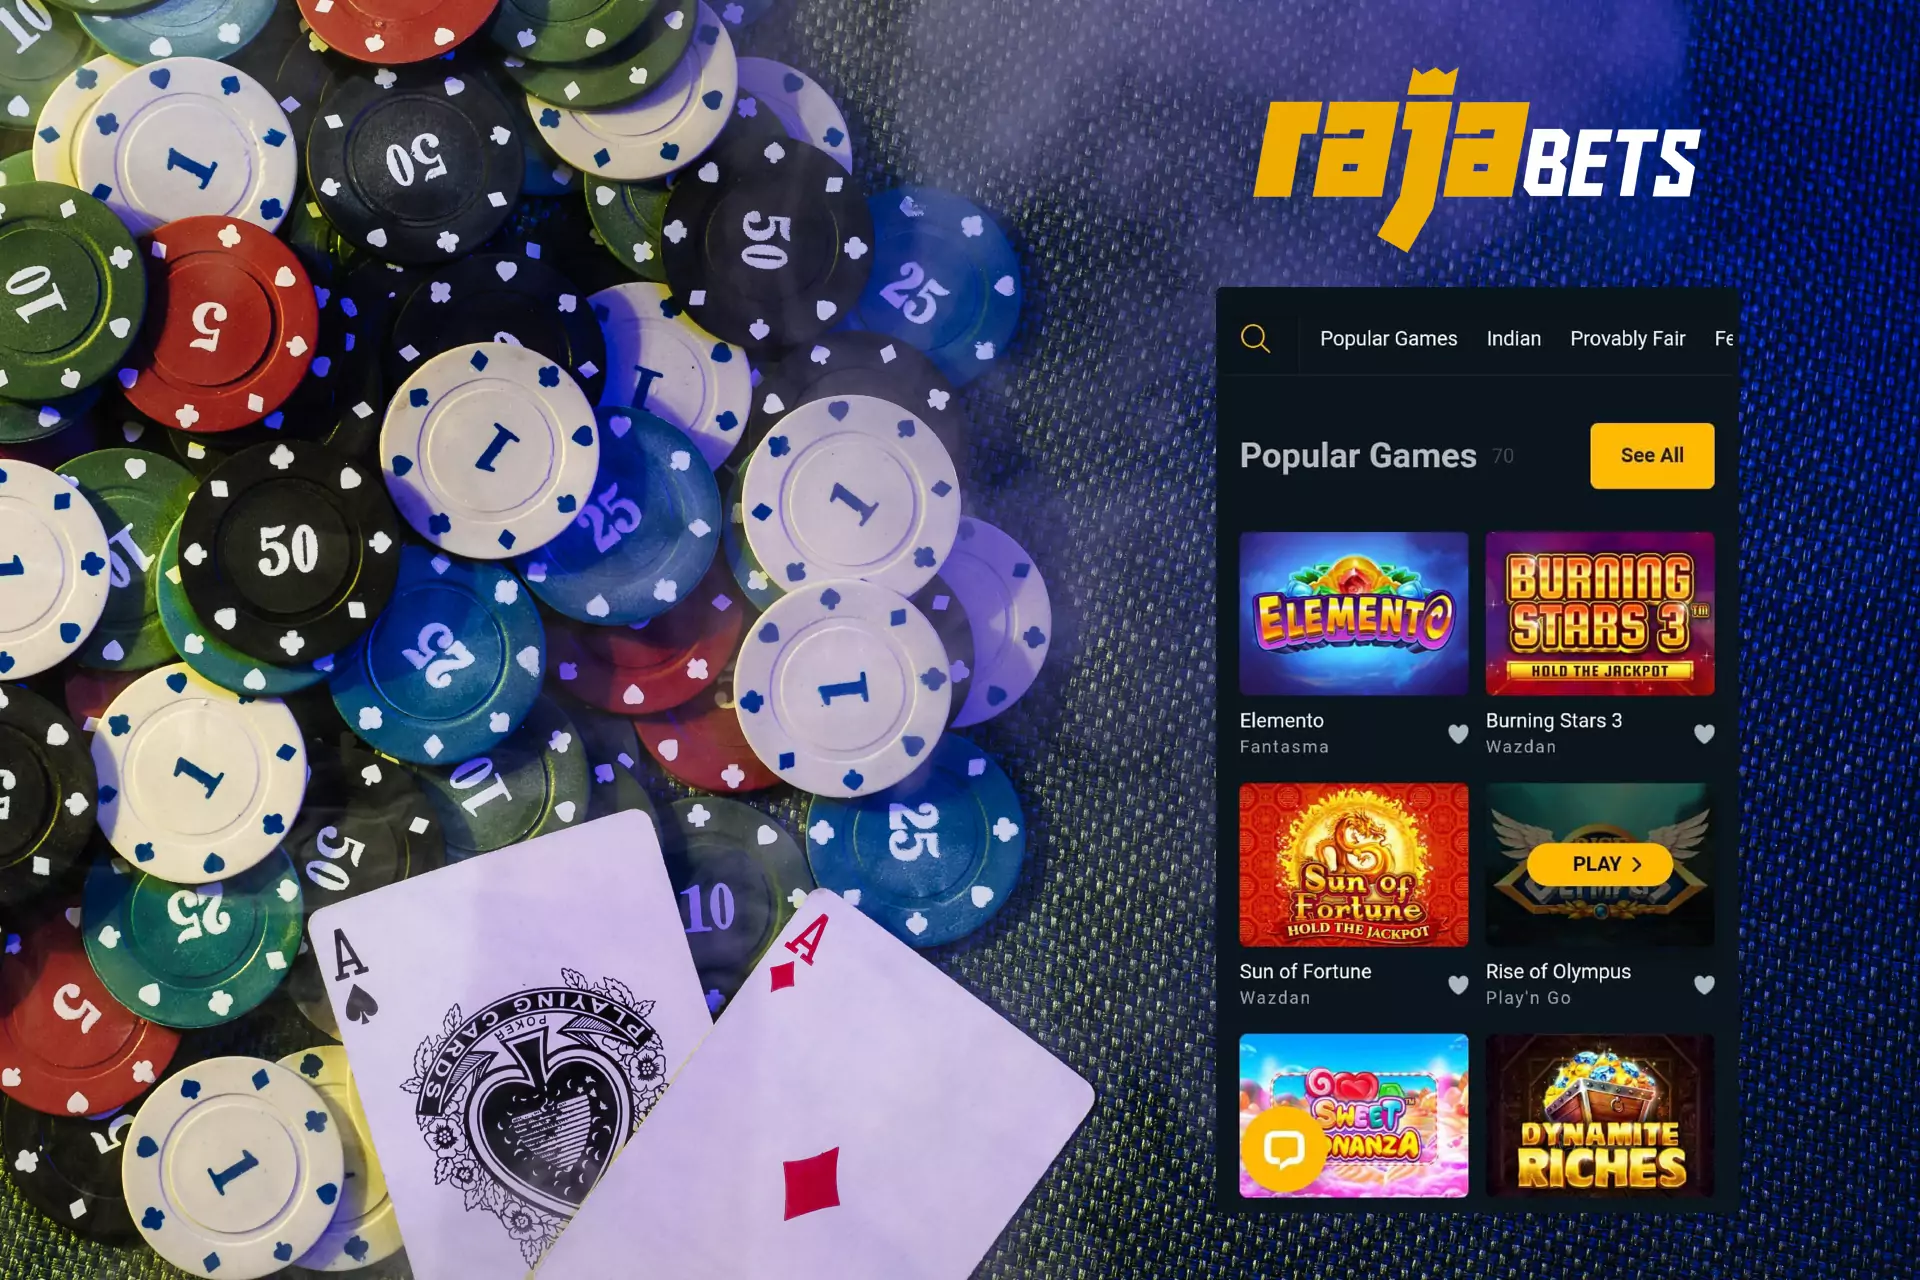 Casino games are available for users in the special section.